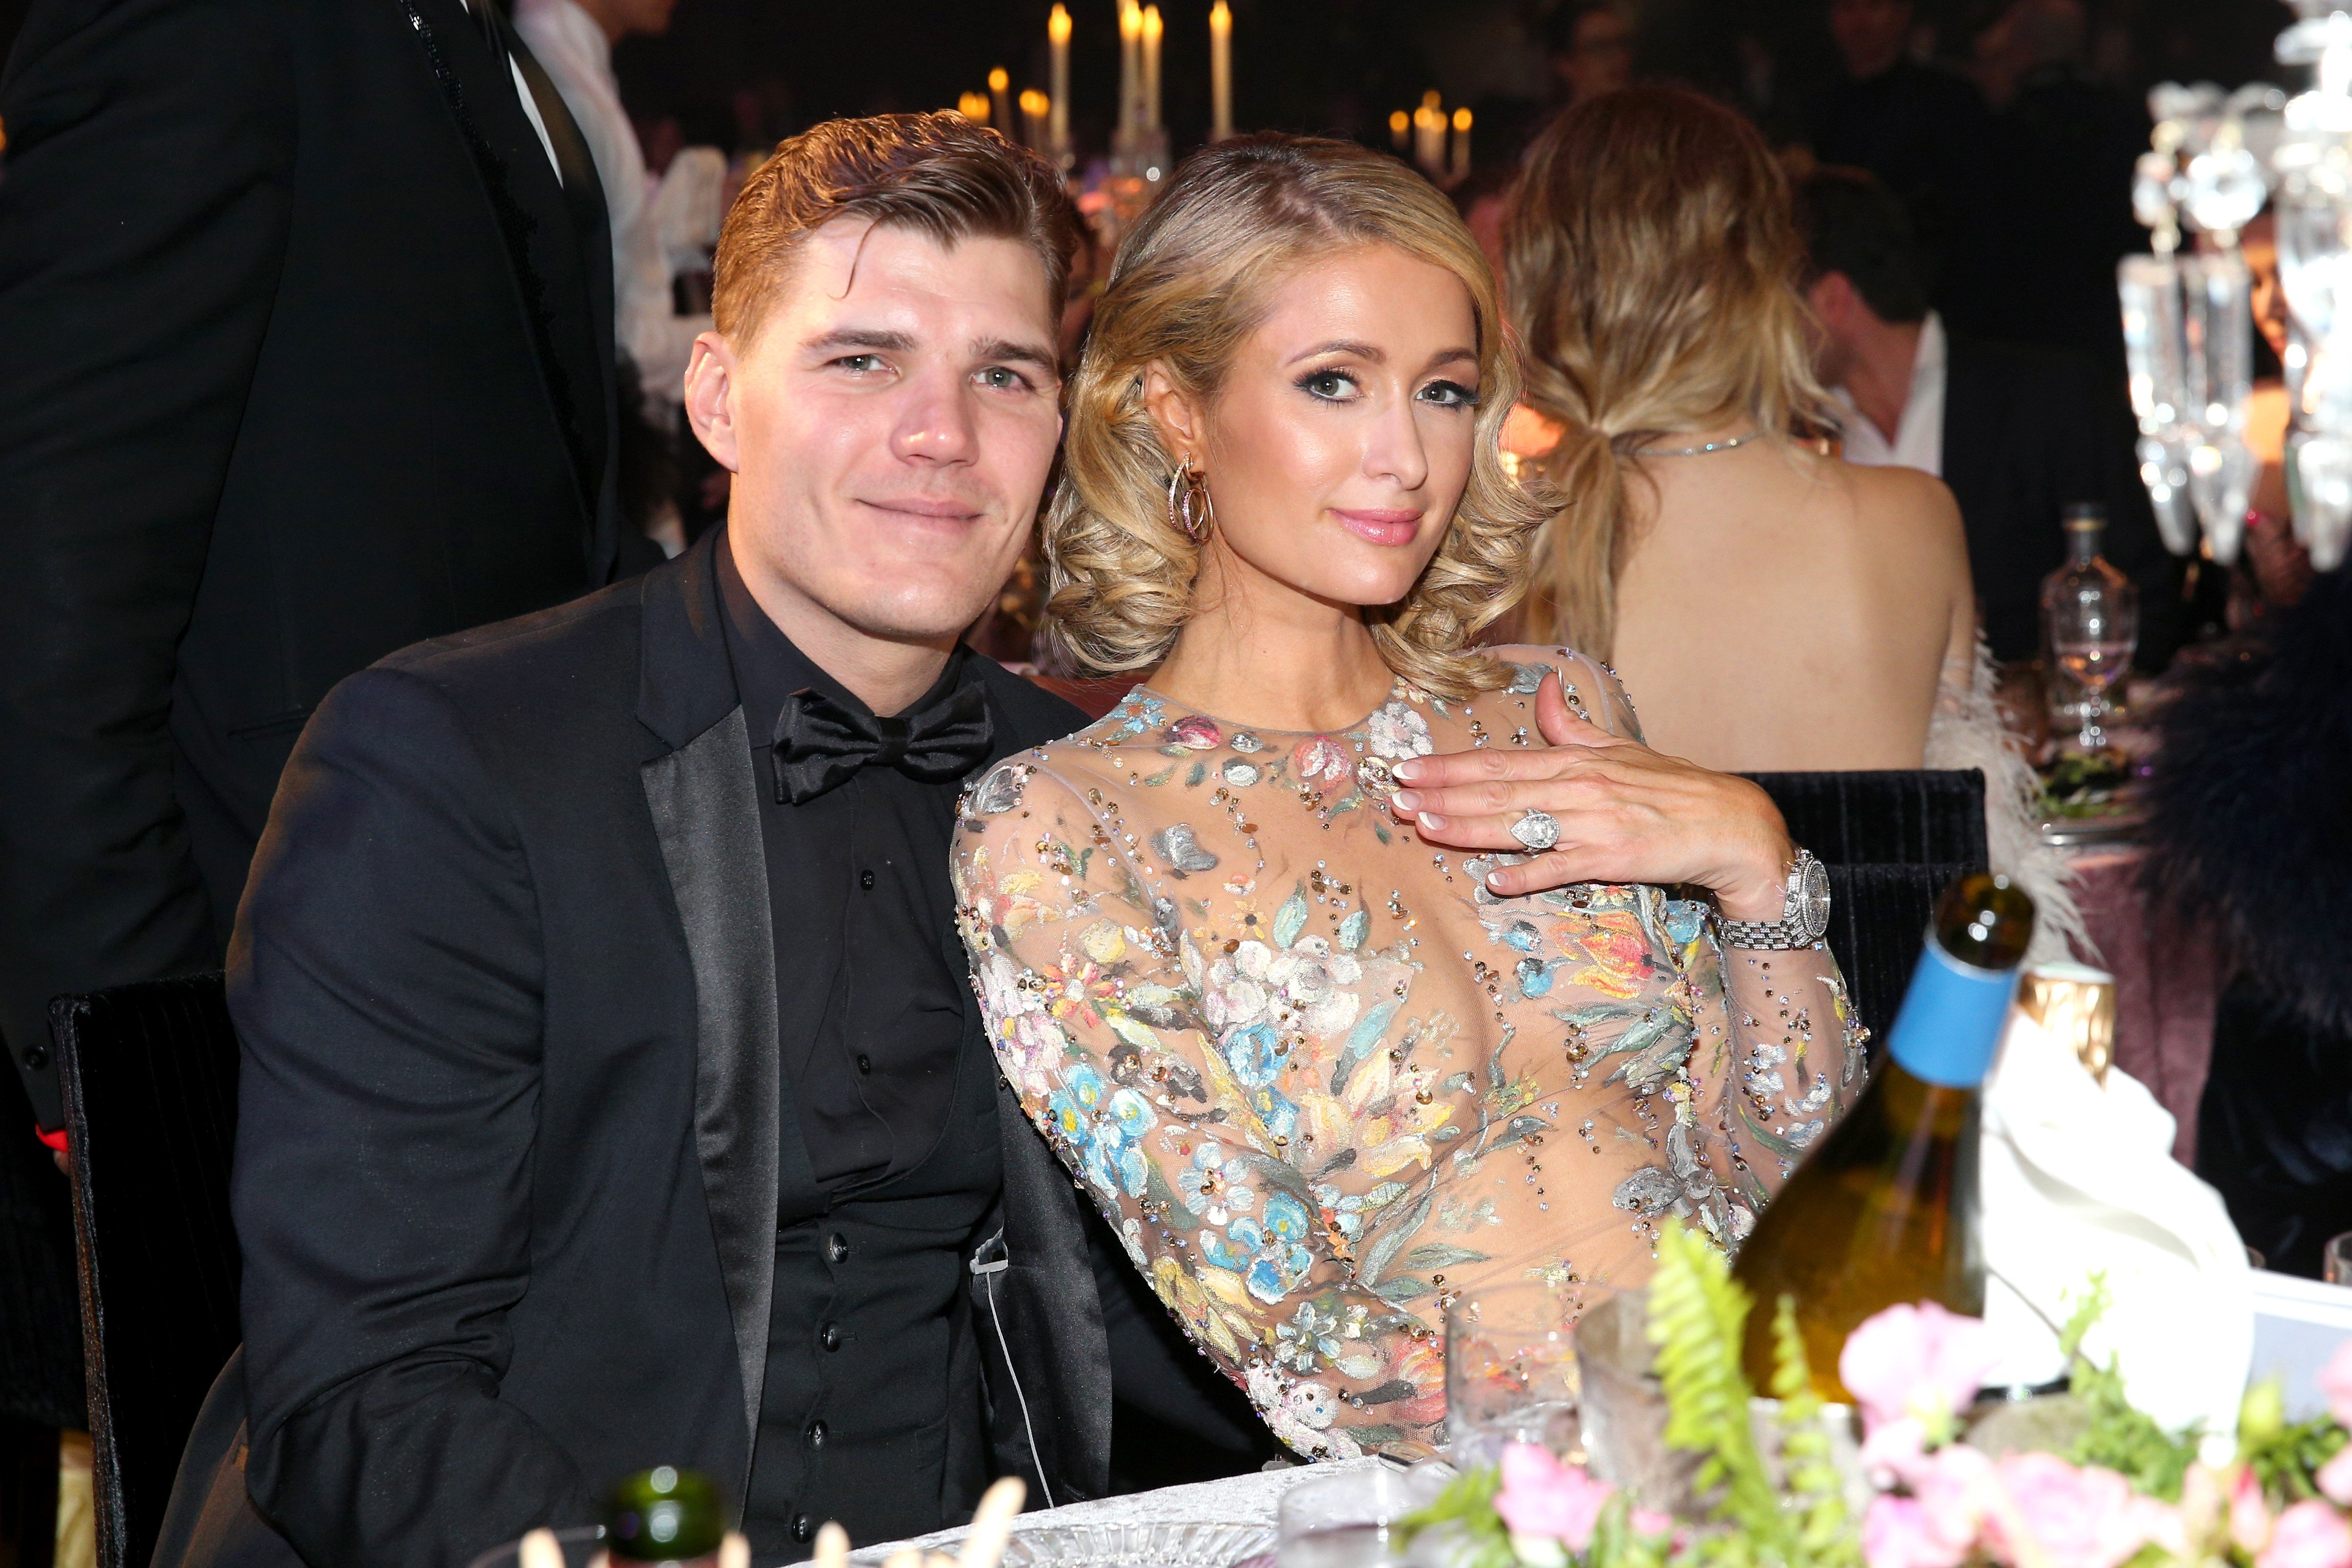  Chris Zylka and Paris Hilton attend the amfAR Gala Cannes 2018 dinner at Hotel du Cap-Eden-Roc on May 17, 2018 in Cap d'Antibes, France | Source: Getty Images